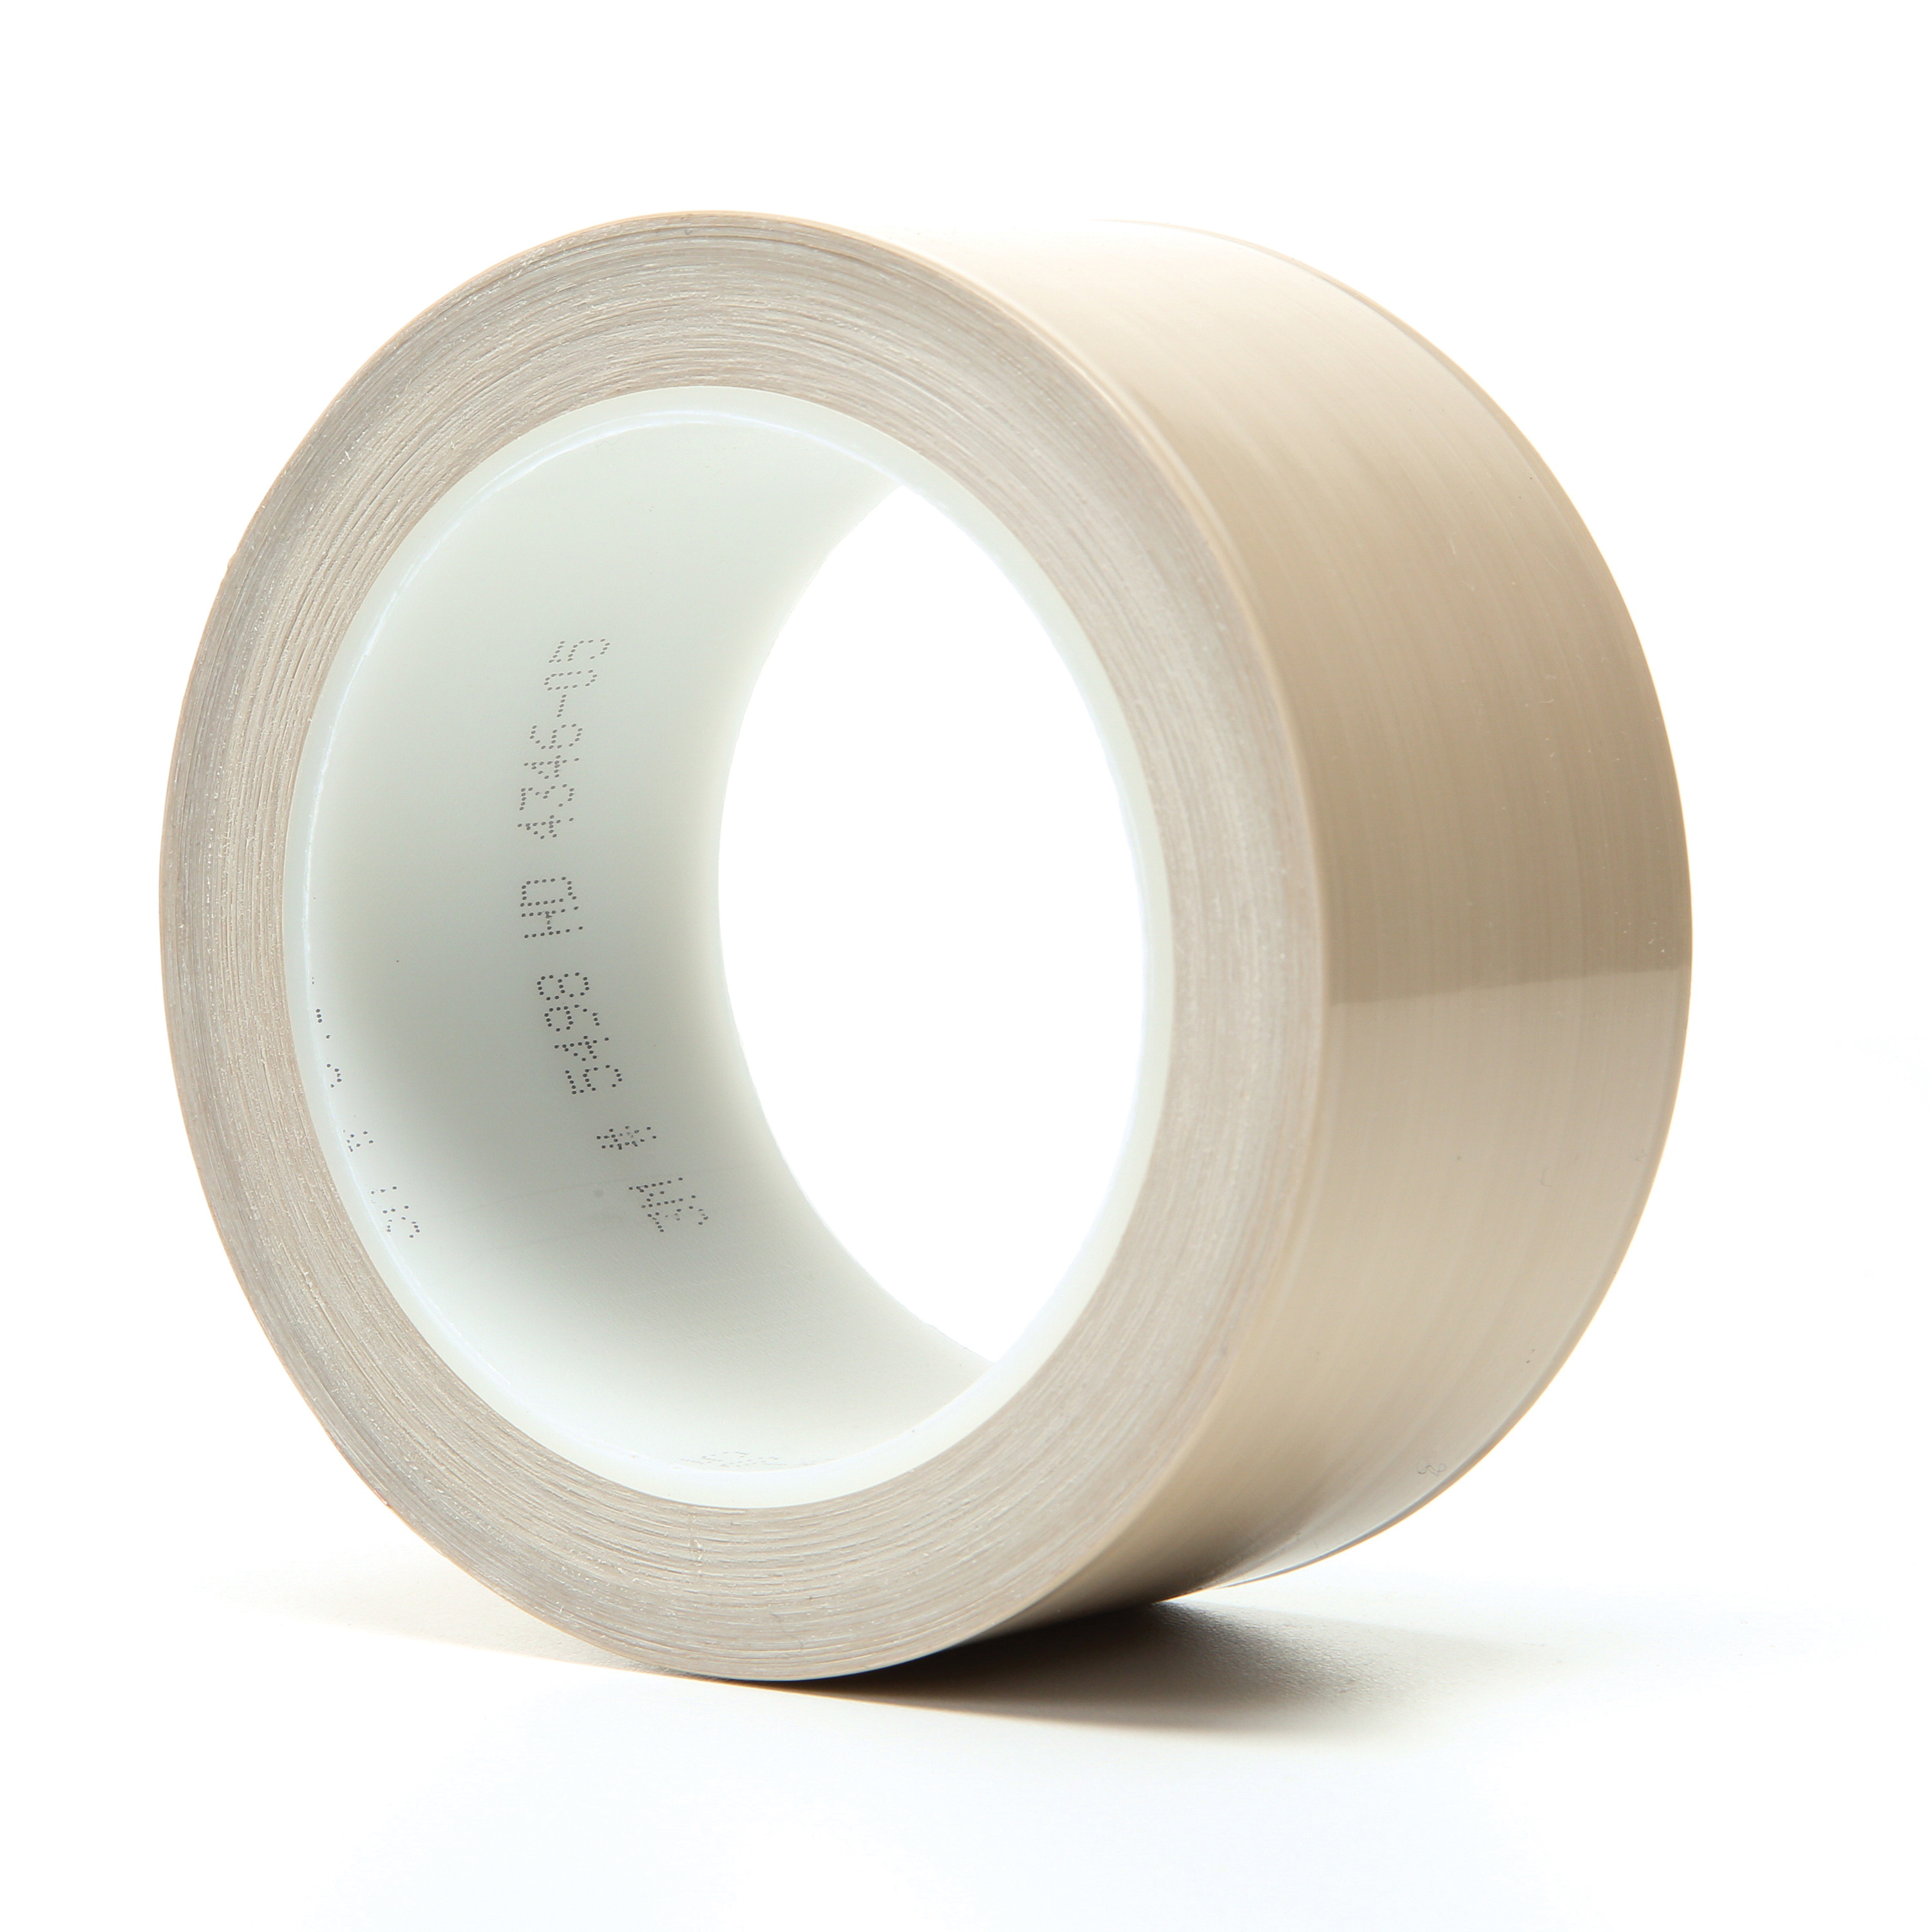 3M™ 021200-24965 Film Tape, 36 yd L x 2 in W, 4 mil THK, Silicon Free Rubber Adhesive, Extruded PTFE Backing, Brown